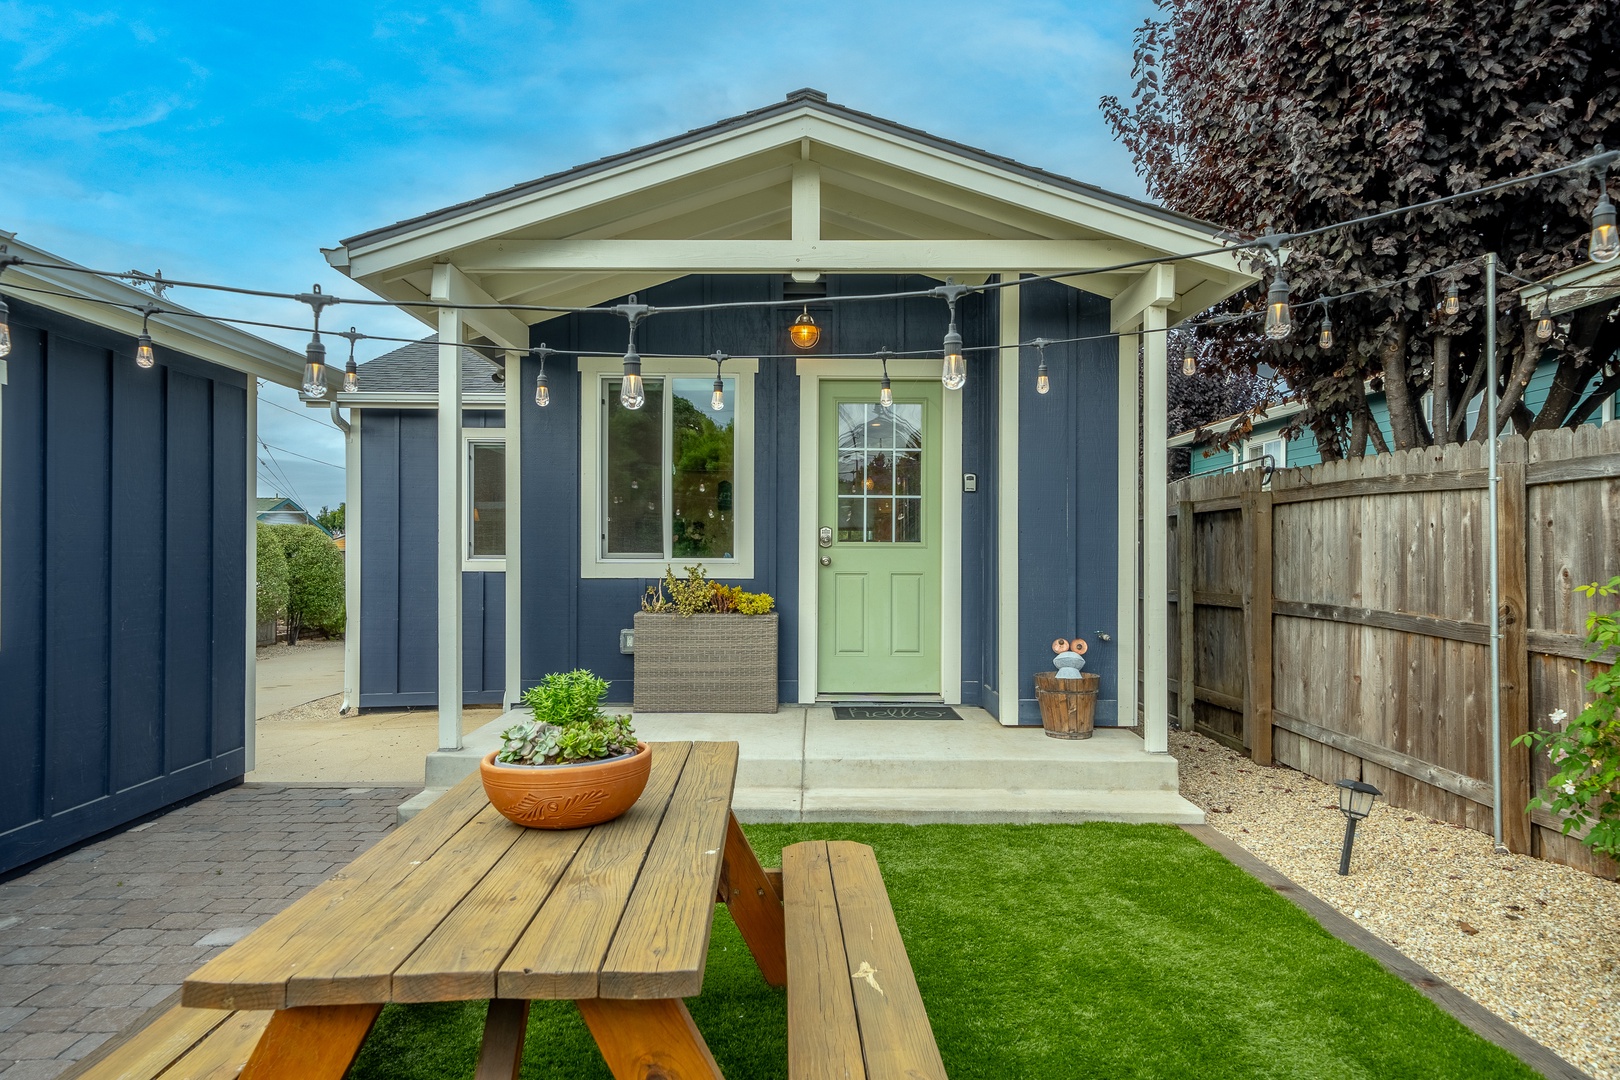 The spacious, enclosed back yard offers ample space for relaxation & play